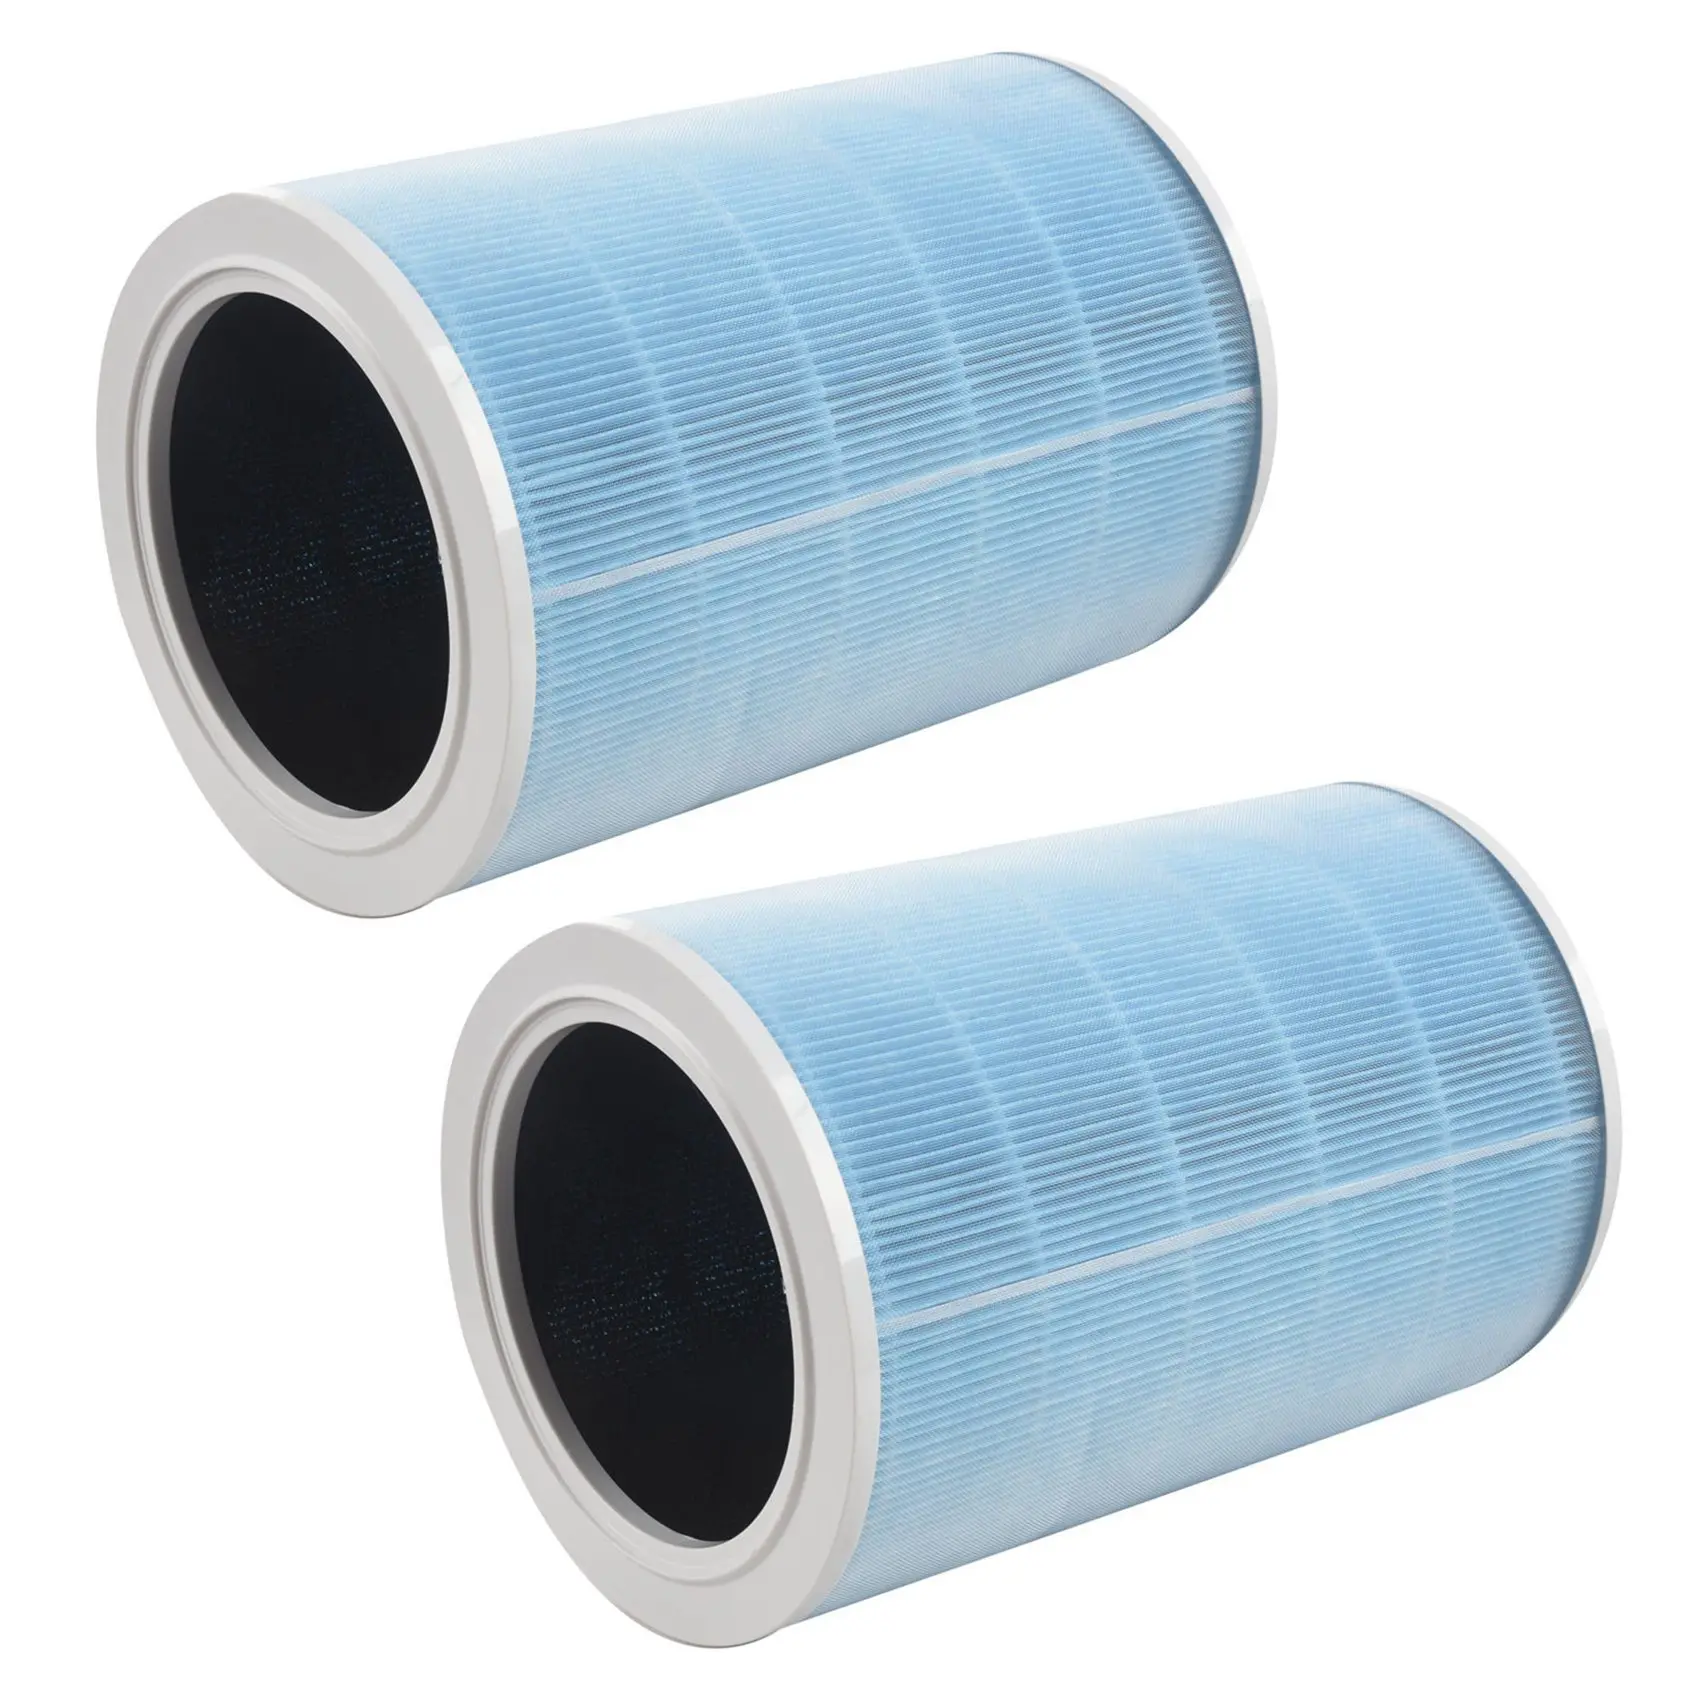 

2X for Xiaomi Air Purifier 2 2S Pro Filter Spare Parts Sterilization Bacteria Purification Pm2.5 Formaldehyde